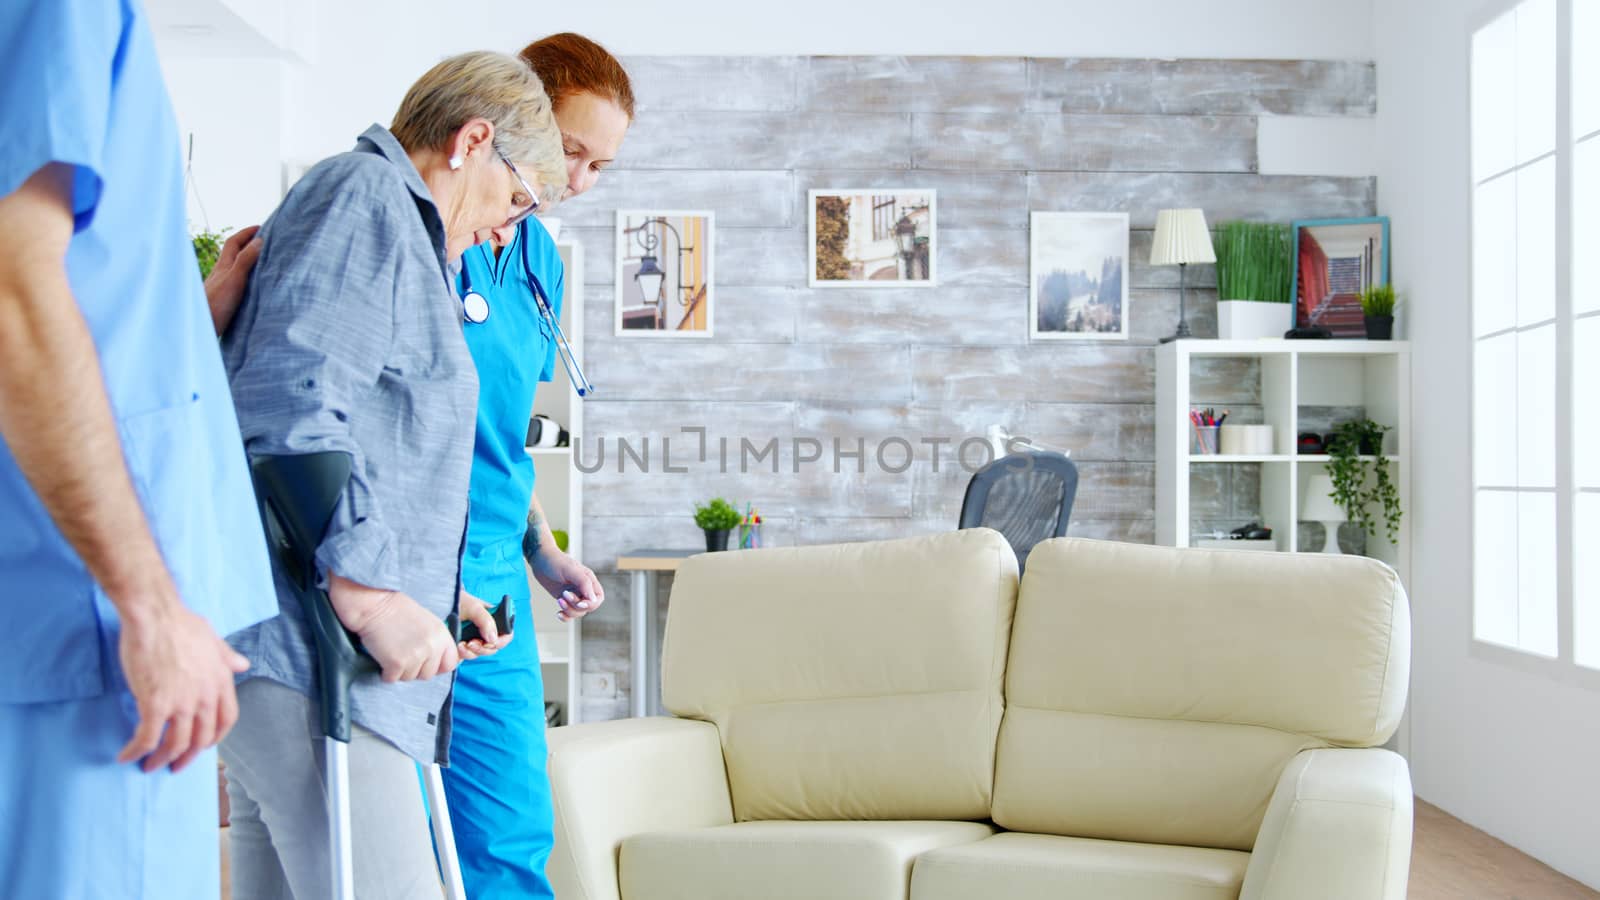 Nurse team helping old disabled lady to walk in the nursing home room by DCStudio